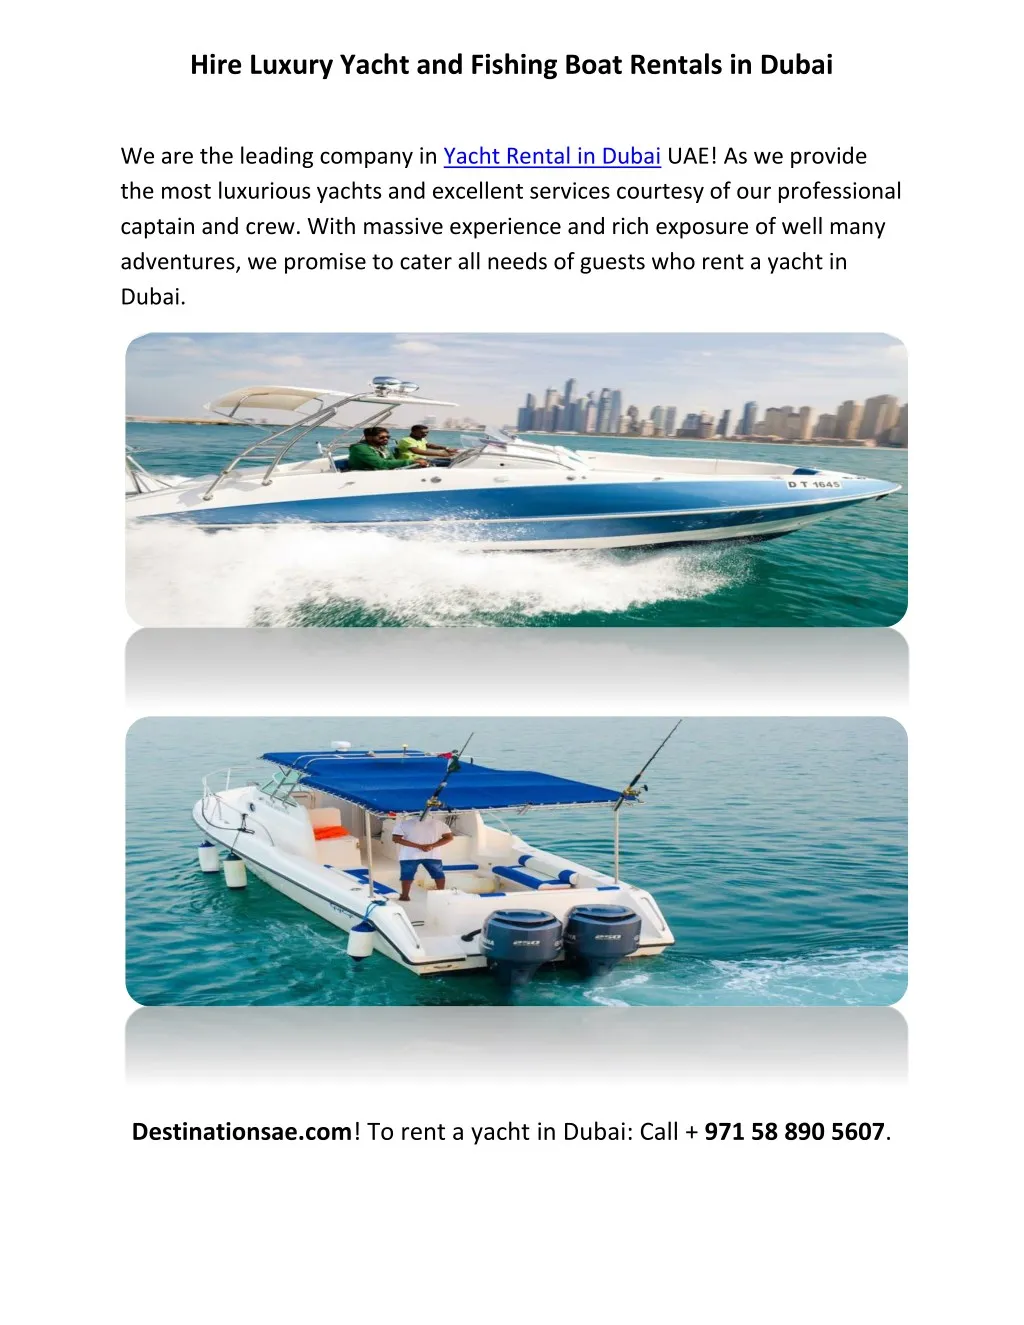 hire luxury yacht and fishing boat rentals